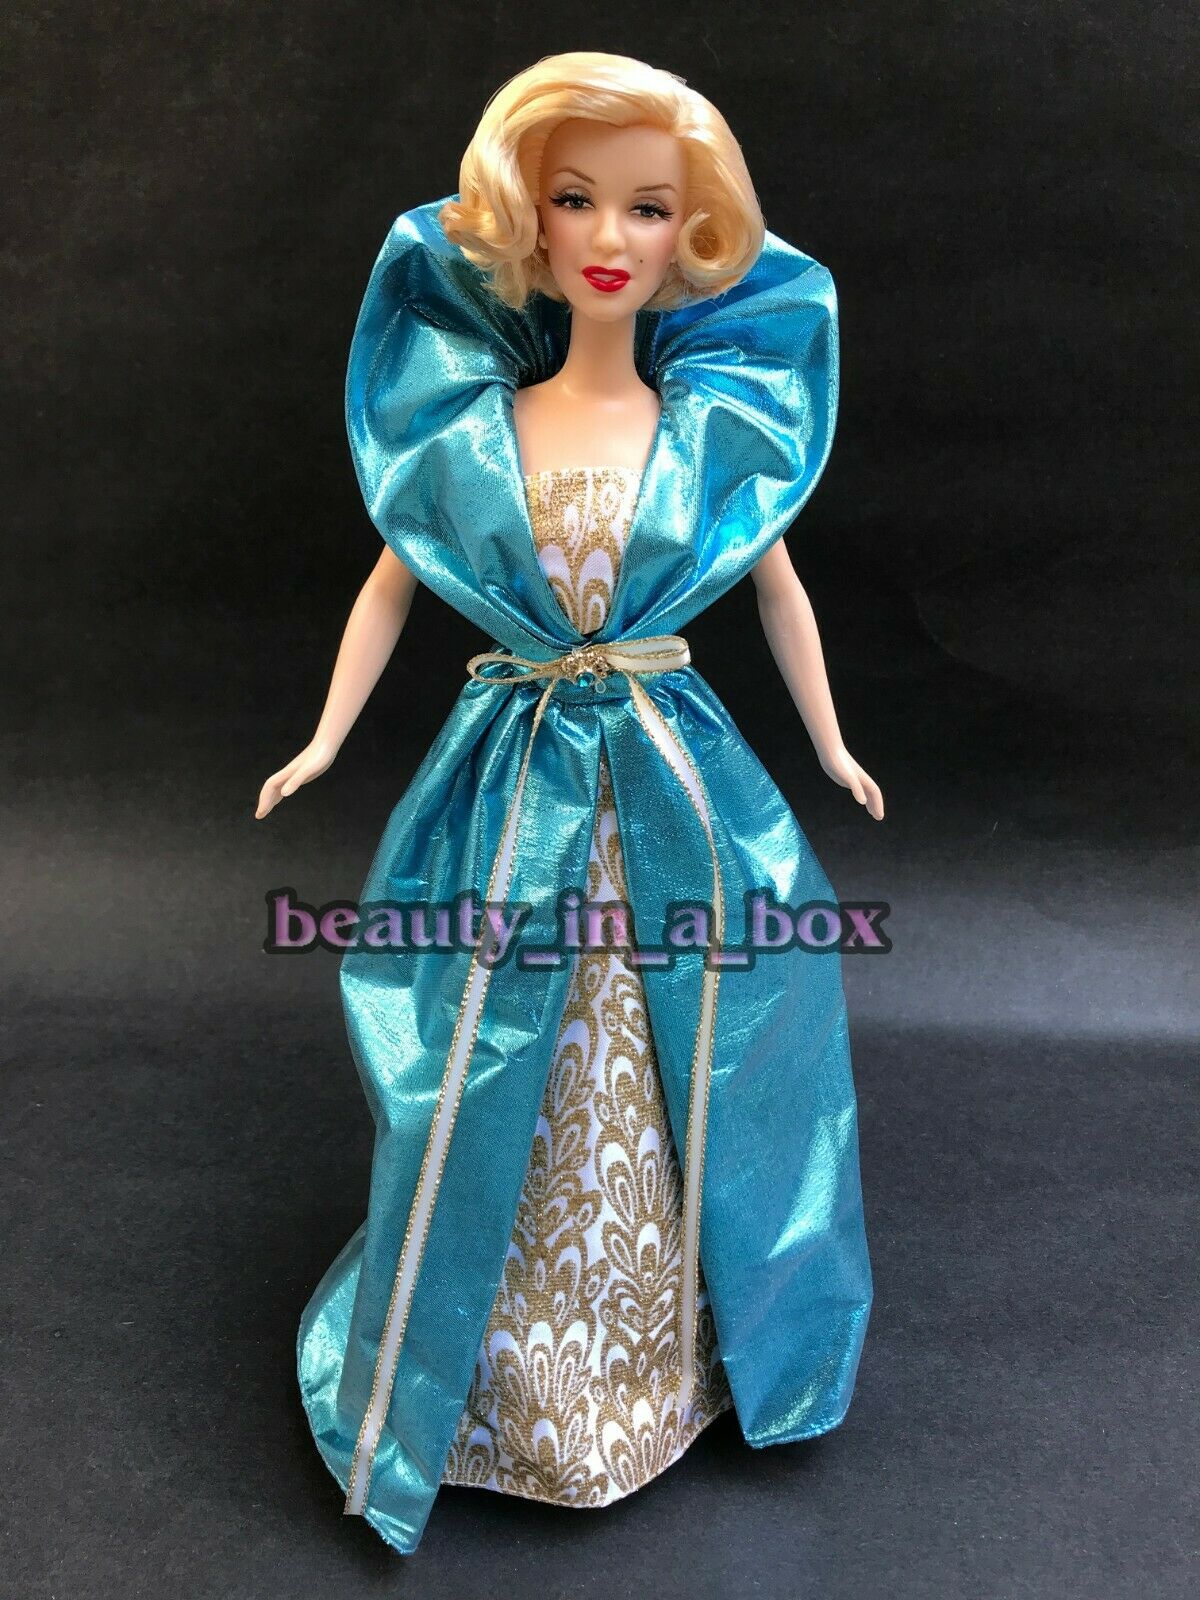 Marilyn Monroe Barbie Doll Turquoise Gown For Red Carpet Celebrity Redress Loose